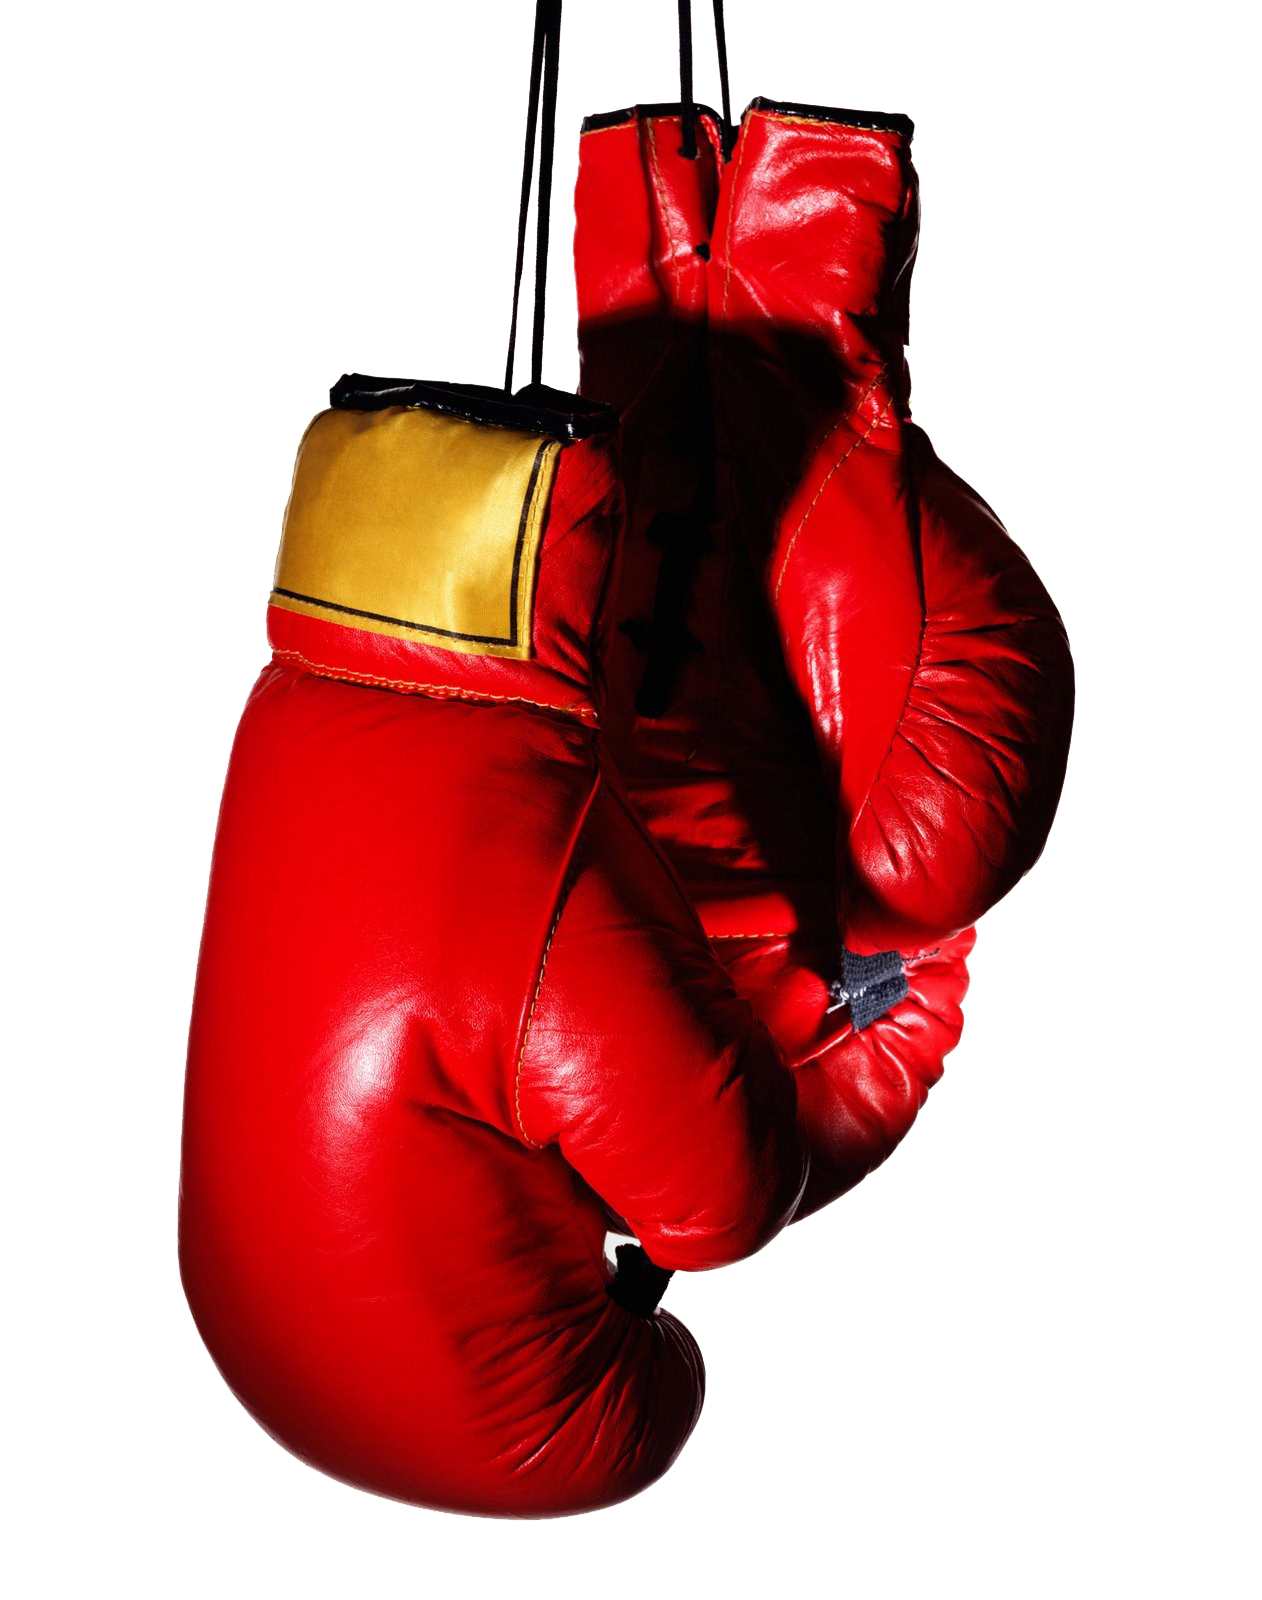 Boxing Gloves Transparent Image Png Image - Boxing Bell, Transparent background PNG HD thumbnail